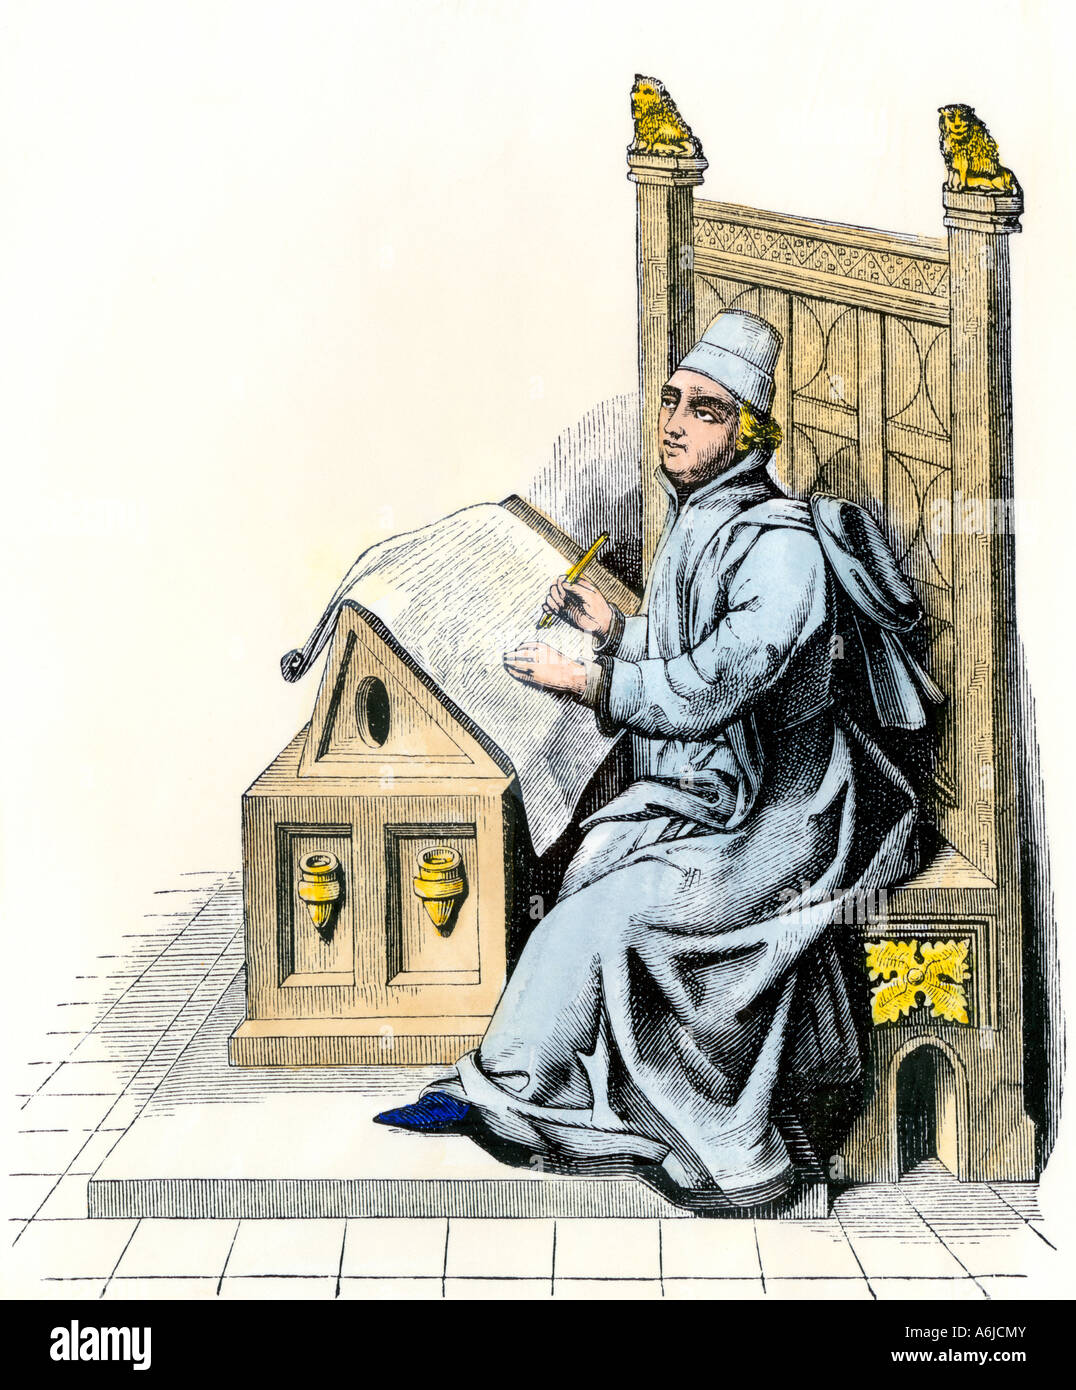 Medieval copyist writing a manuscript on a sheet of vellum 1400s. Hand-colored woodcut Stock Photo